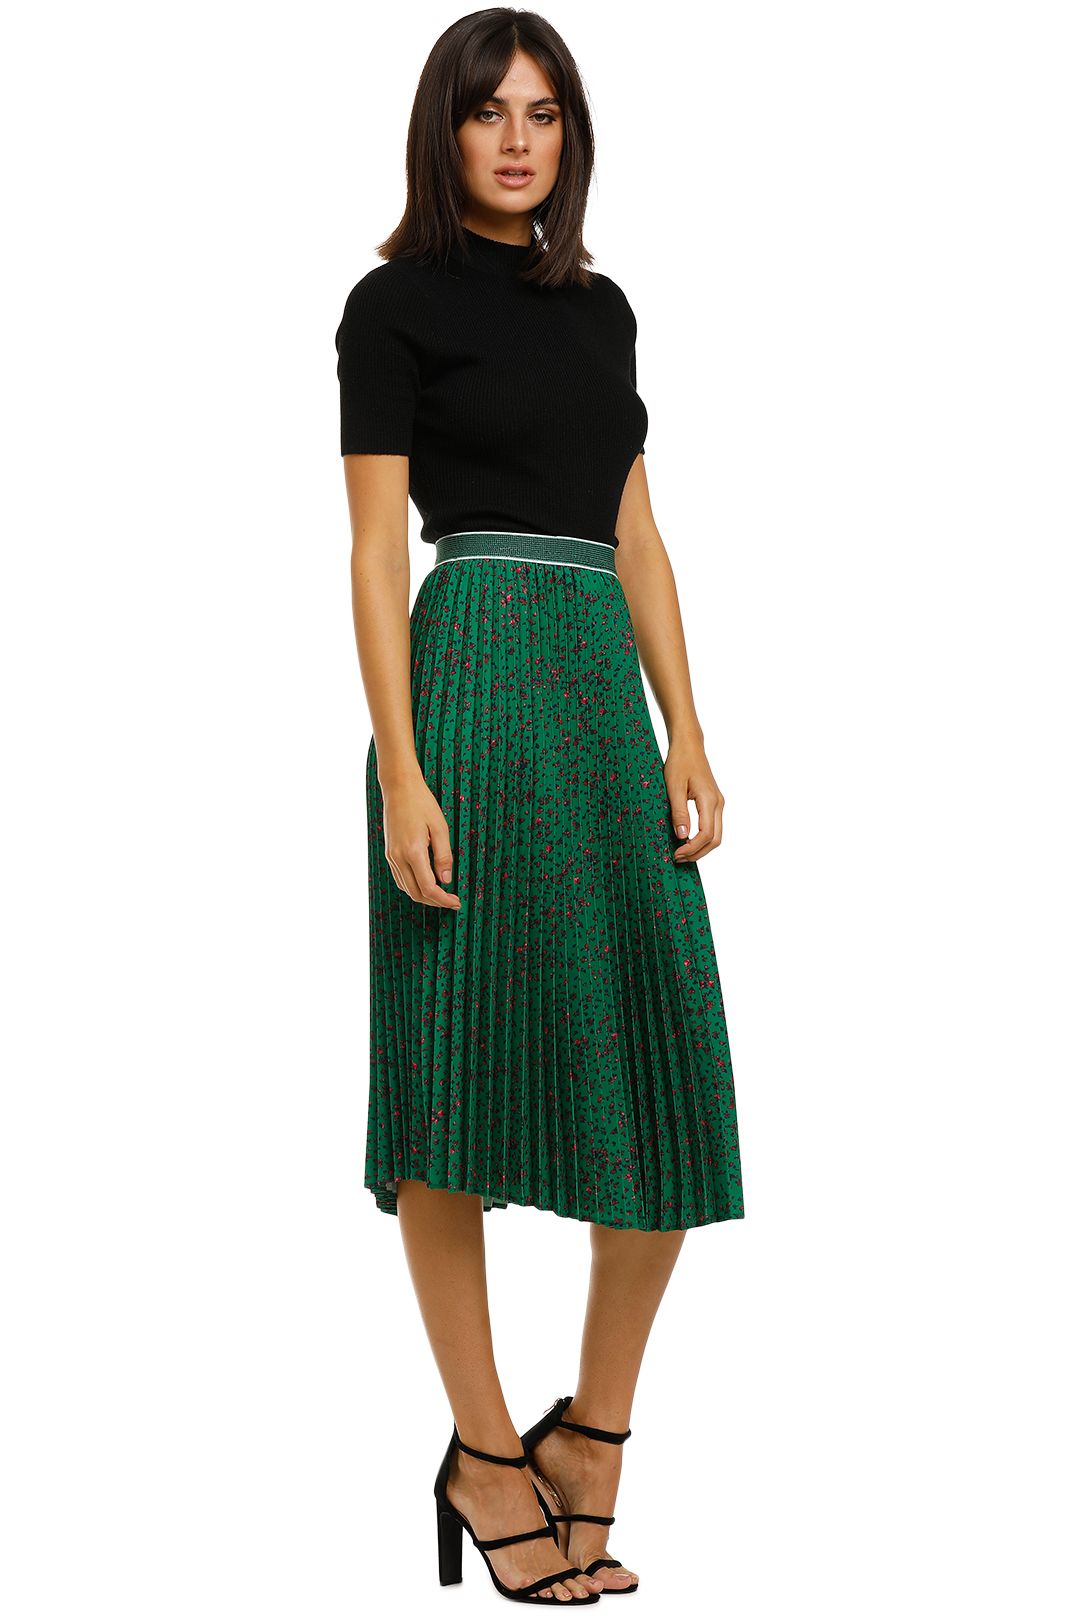 Curate-by-Trelise-Cooper-Side-Pleat-Skirt-Green-Side